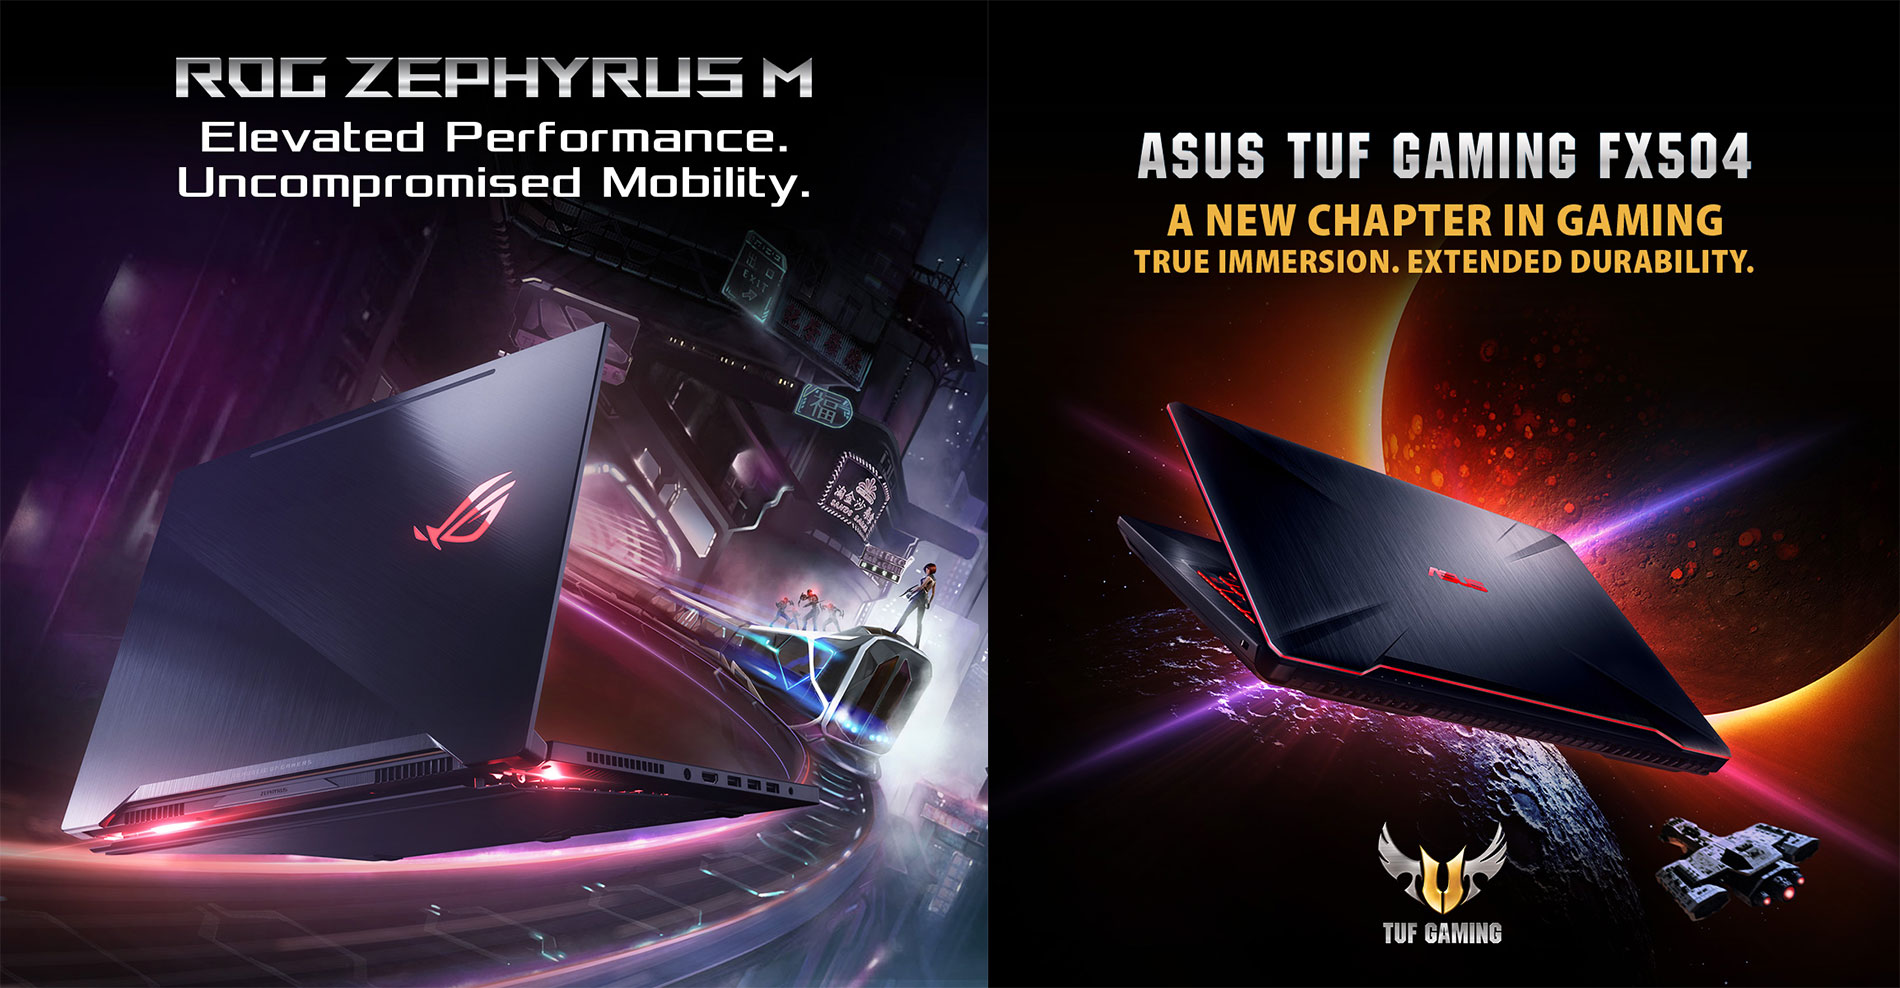 ASUS ROG Zephyrus M and TUF Gaming FX504